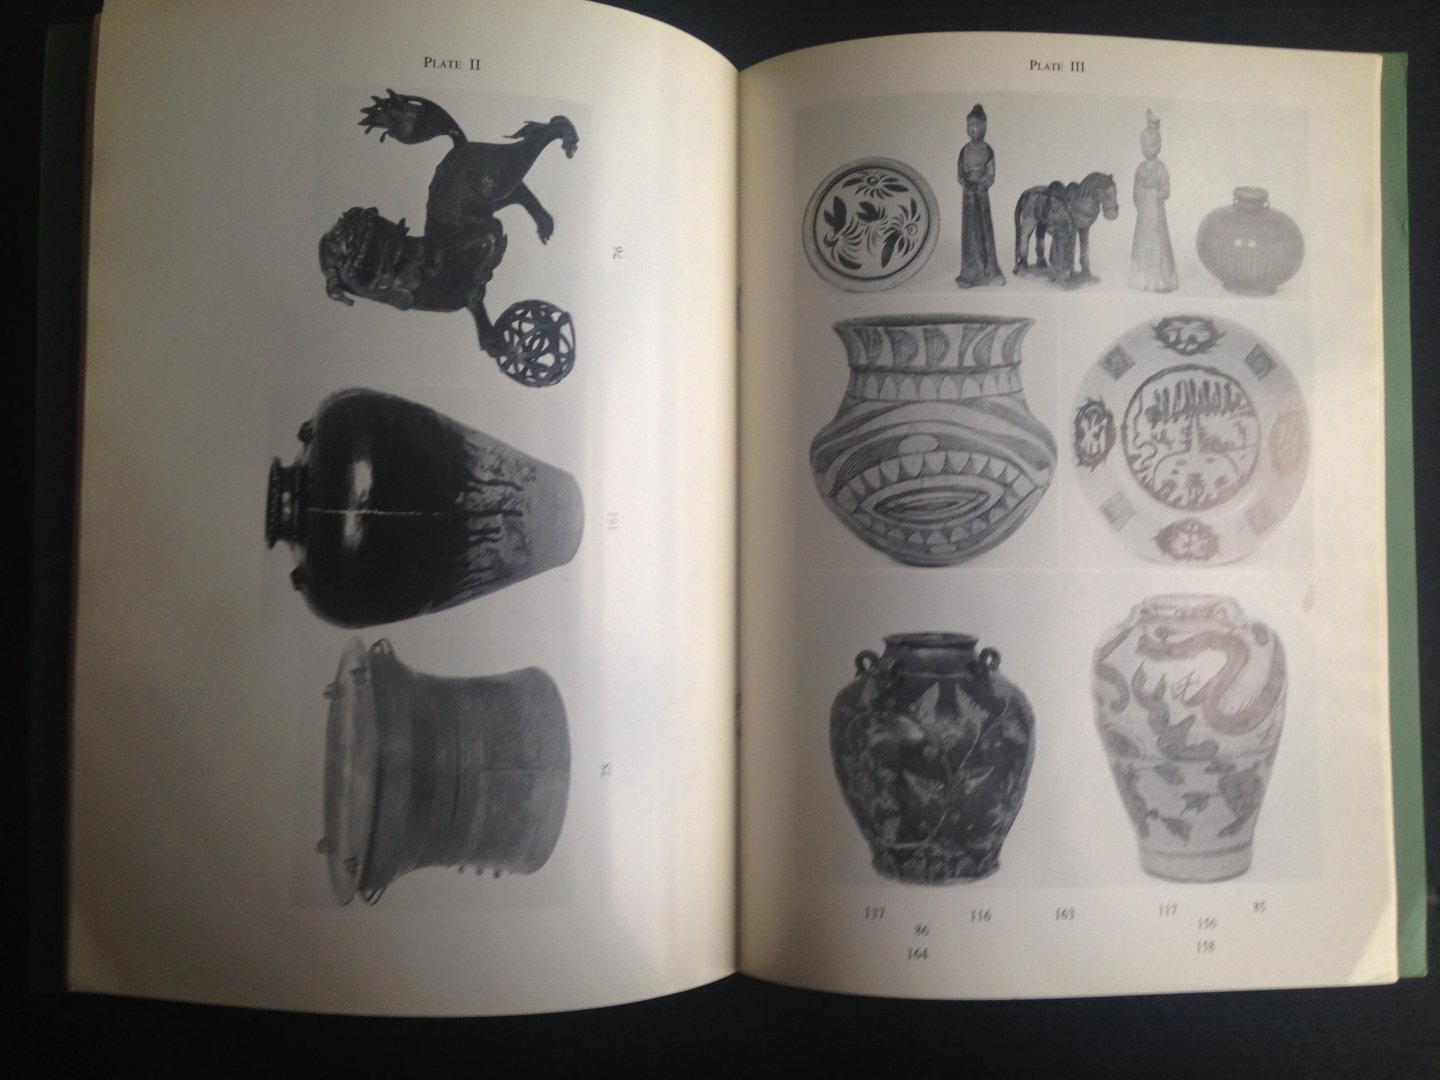 Catalogue Sotheby - Oriental Ceramics and Works of Art